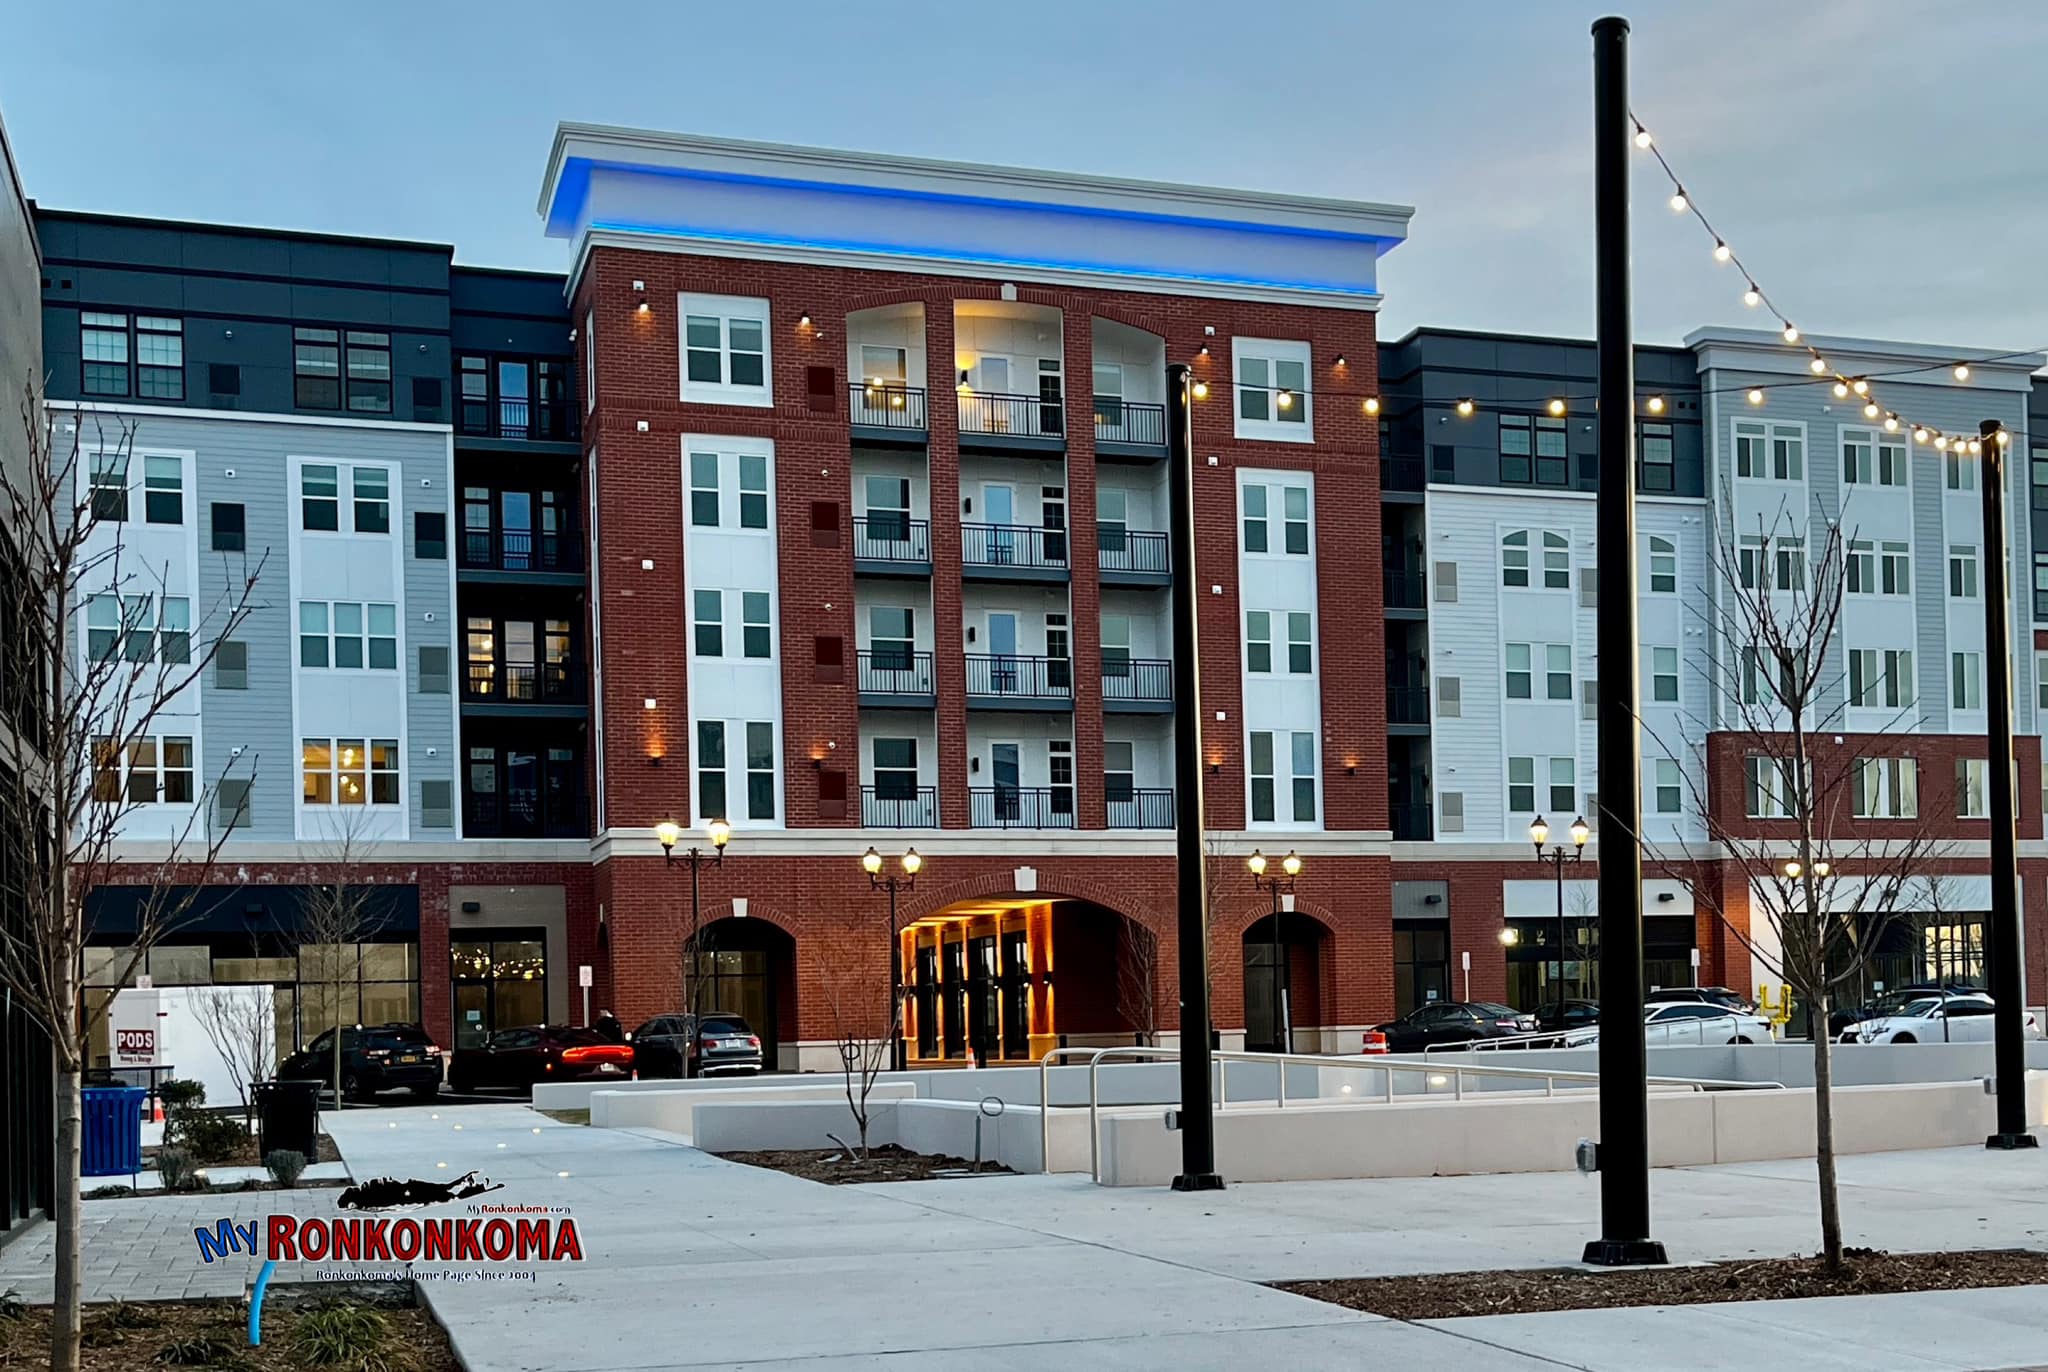 Welcome To Long Island’s Newest Downtown. The Ronkonkoma Hub.